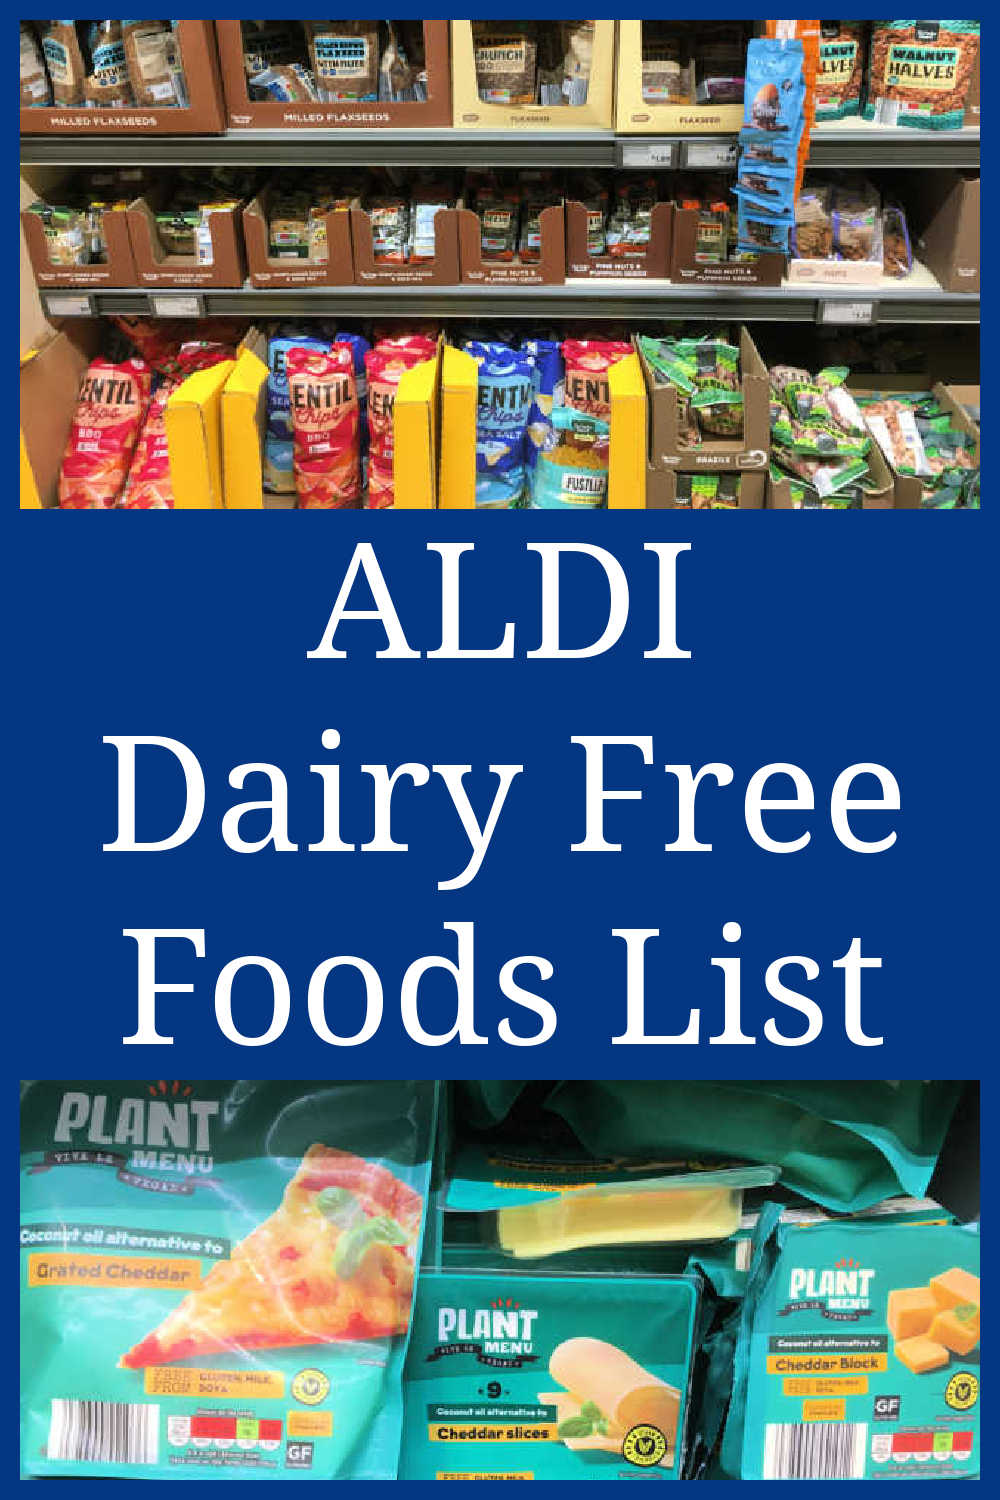 Aldi Dairy Free Foods List - The best dairy-free food finds to put on your shopping list - with a video tour of the top products at my local store.